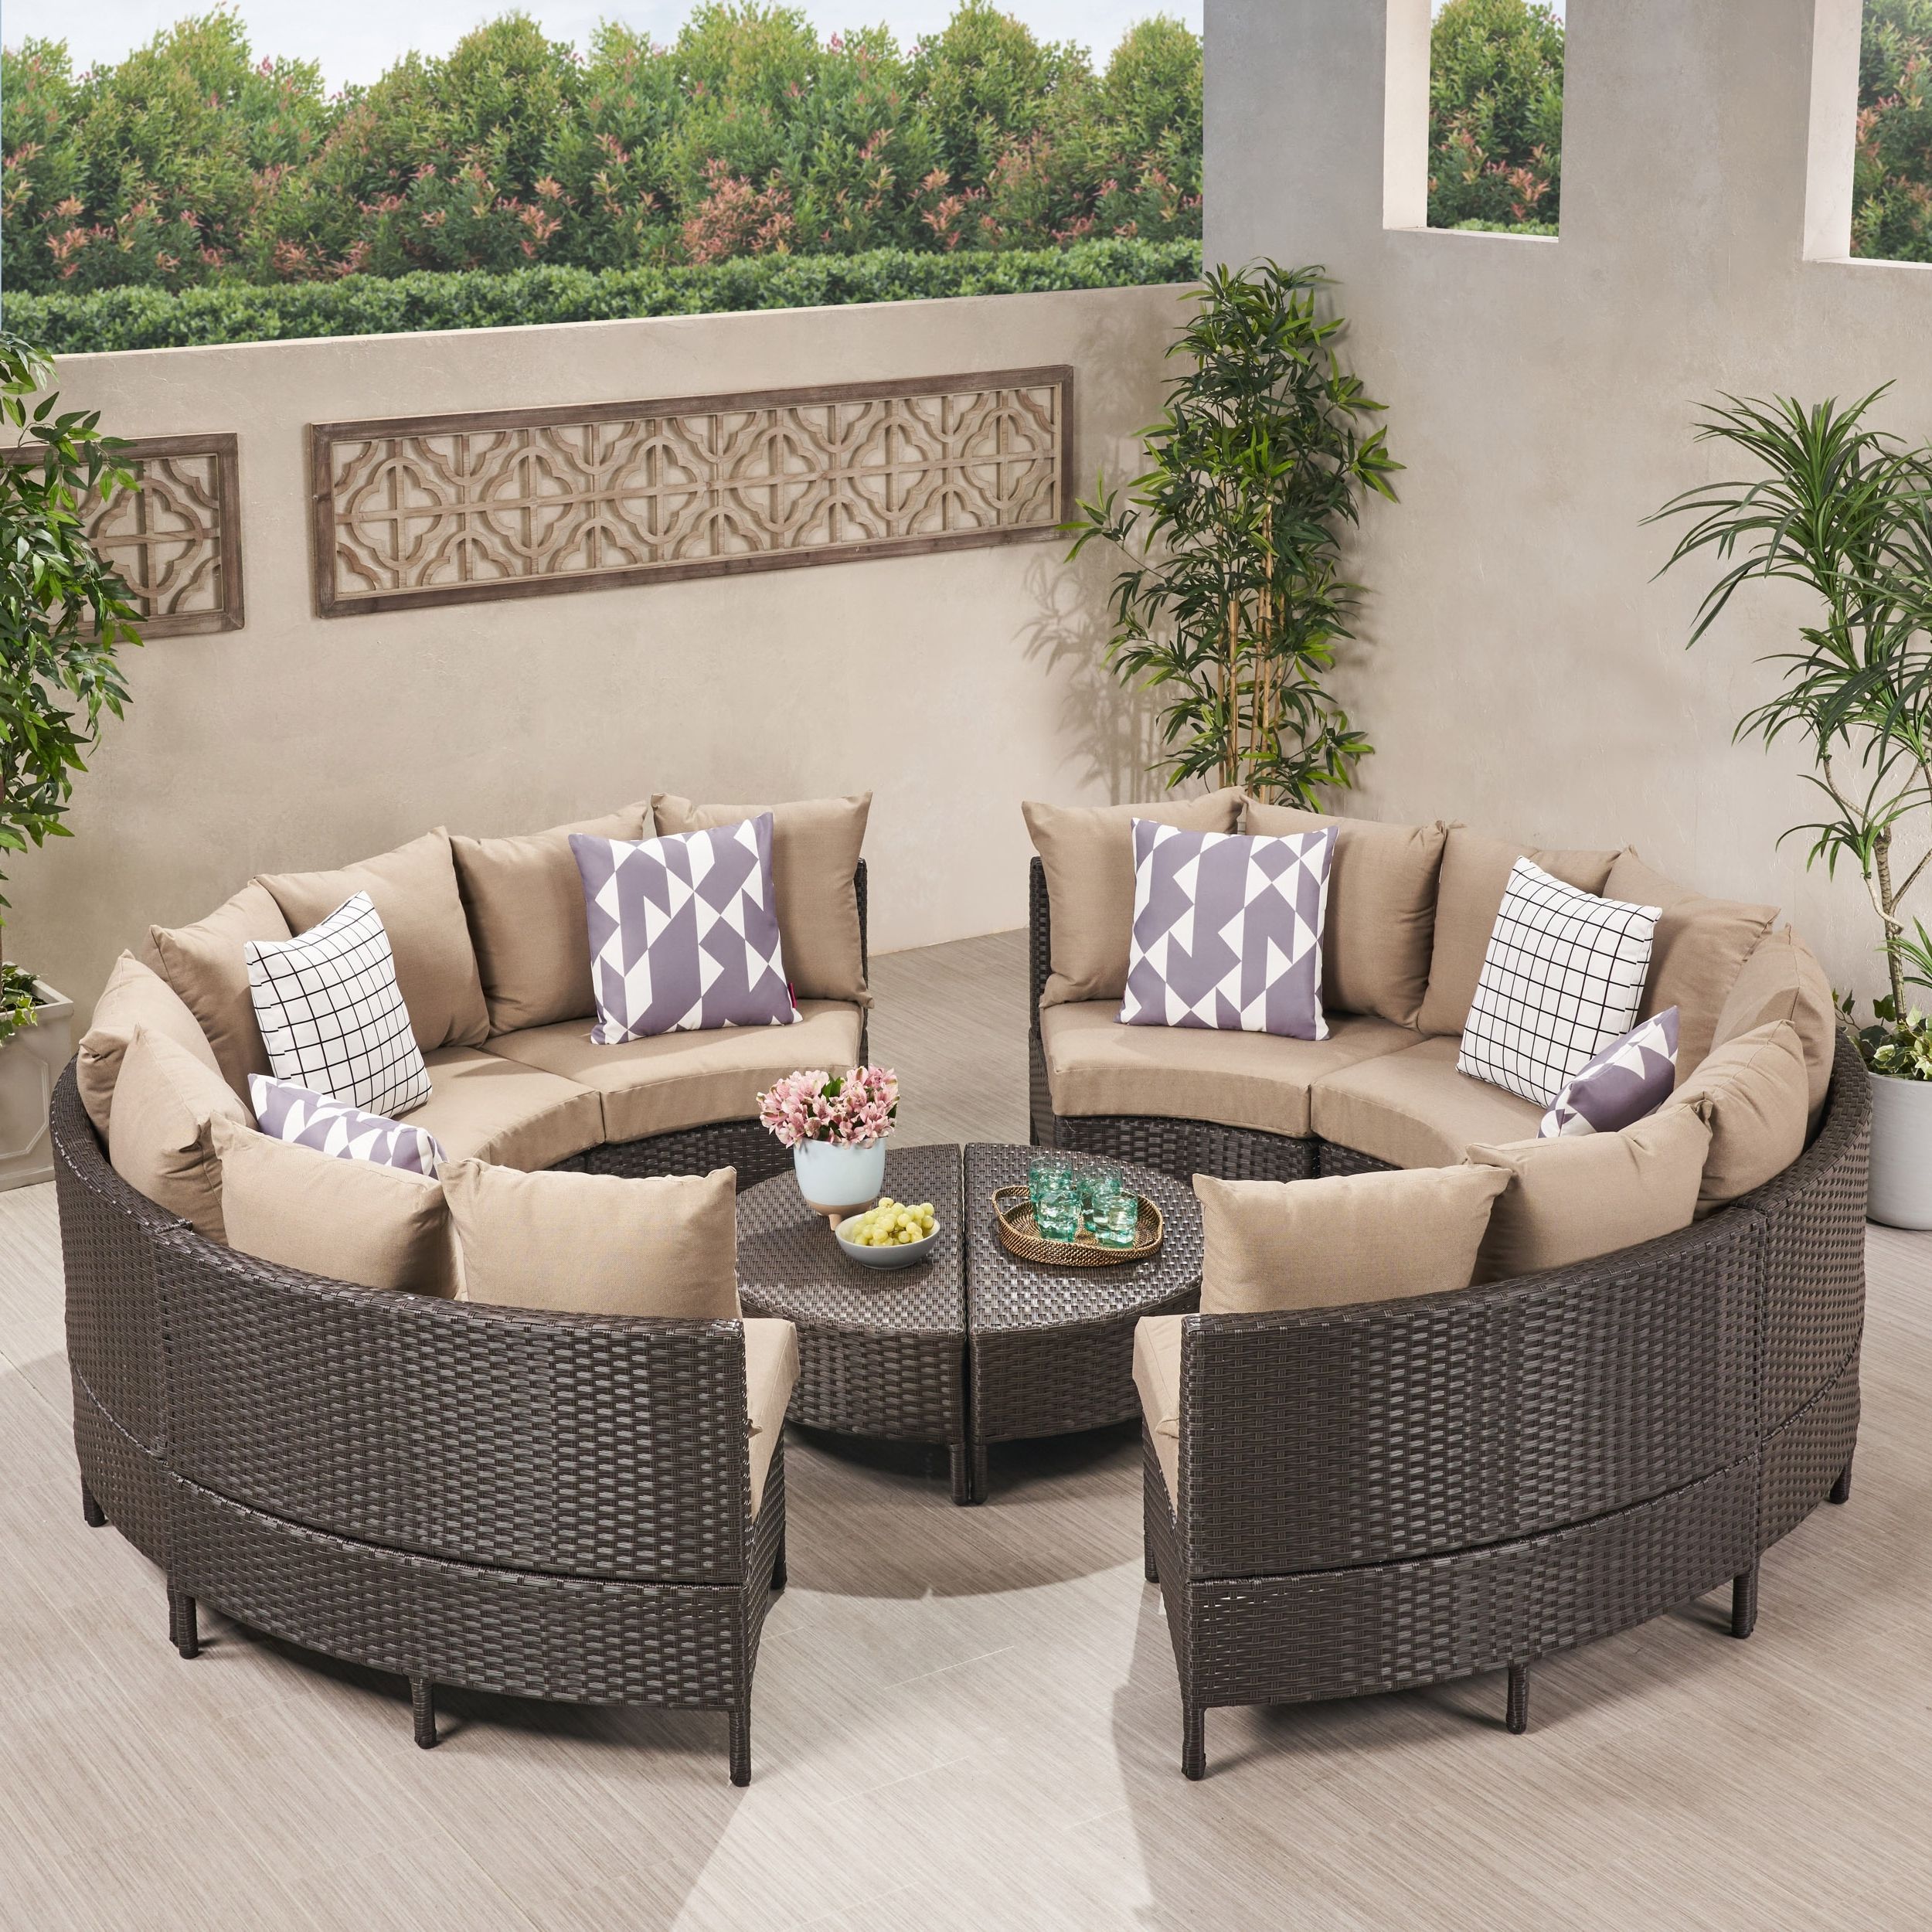 Newton All Weather Wicker Sectional Sofa Setchristopher Knight Home –  On Sale – – 20598608 With 2019 Outdoor Rattan Sectional Sofas With Coffee Table (View 4 of 15)